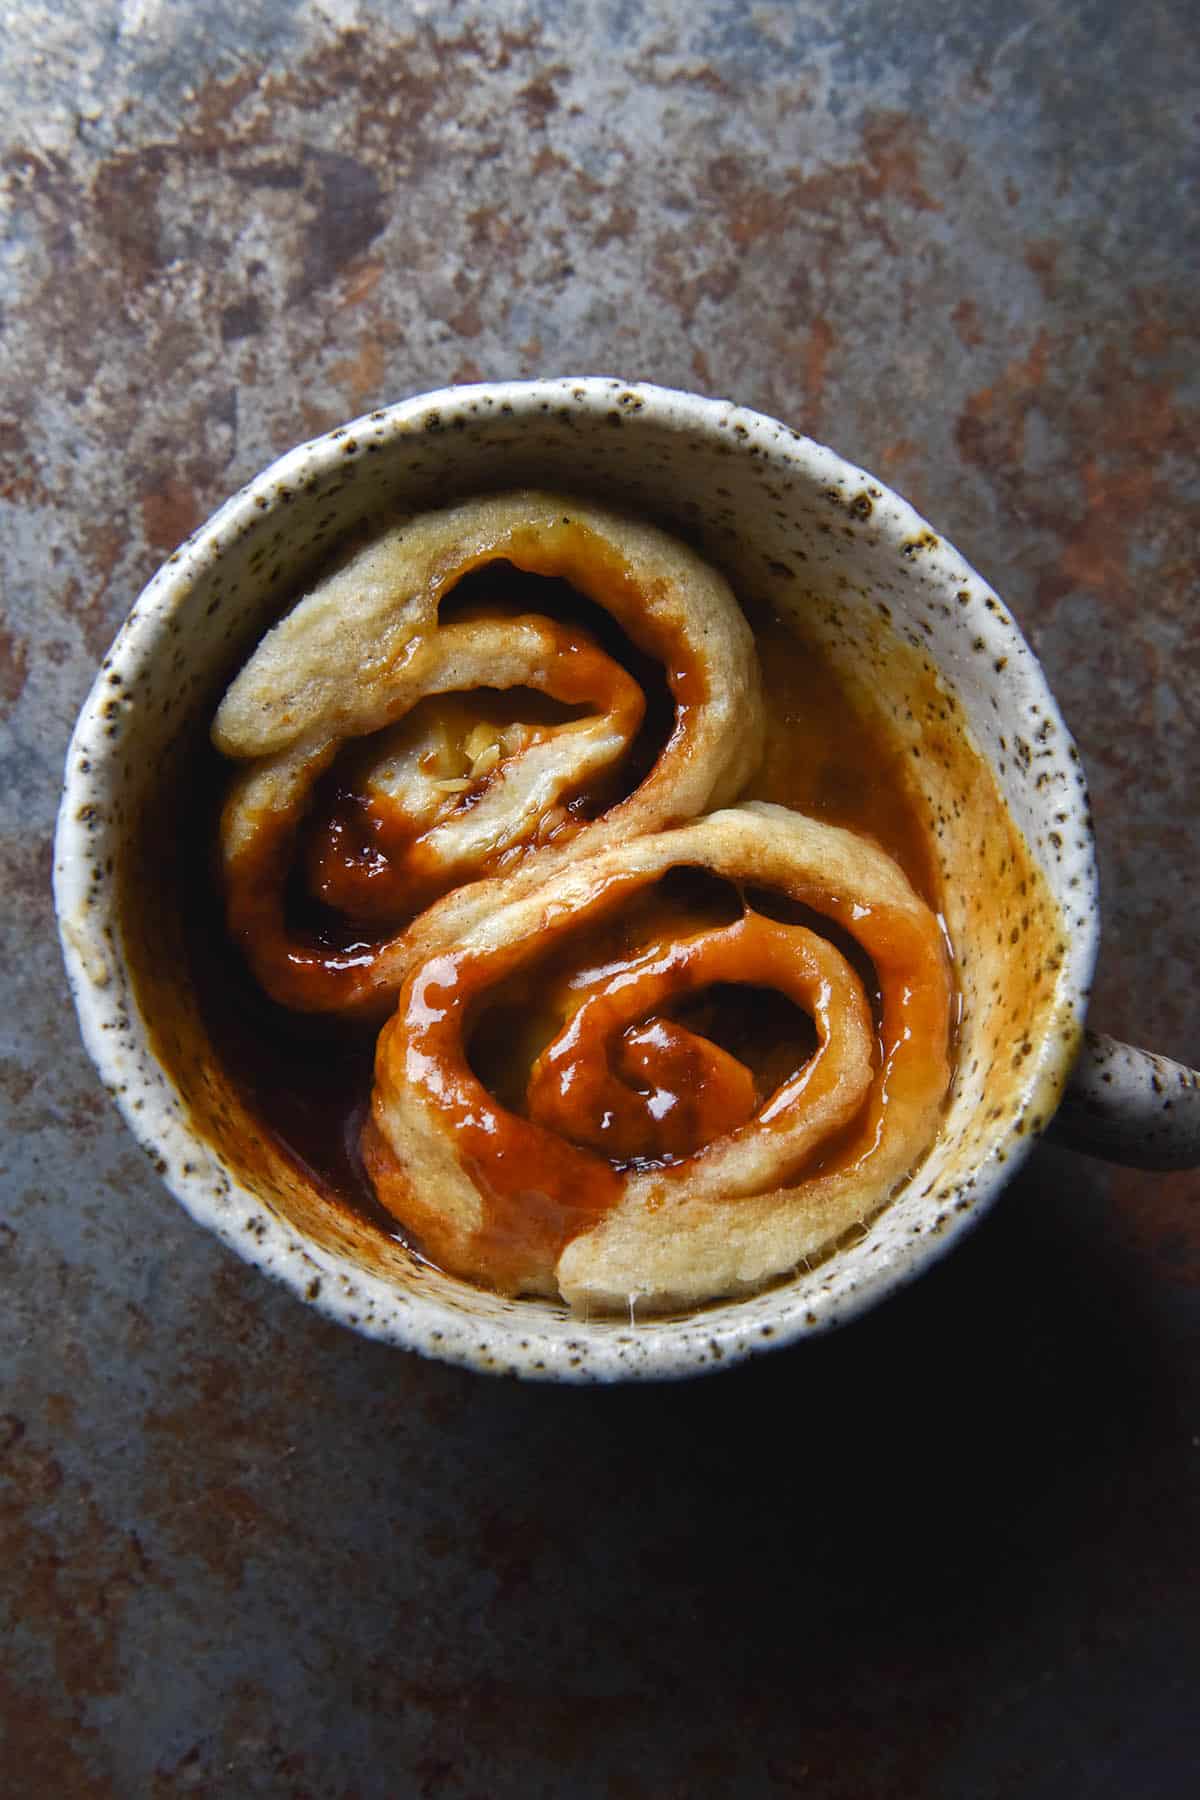 An aerial view of a gluten-free microwave Vegemite scroll in a white speckled ceramic mug. The scroll has been cut in two, revealing two Vegemite and melted cheese swirls. The cheese and Vegemite intermingle to produce varying brown, orange and yellow tones, which contrast nicely with the mottled denim blue backdrop